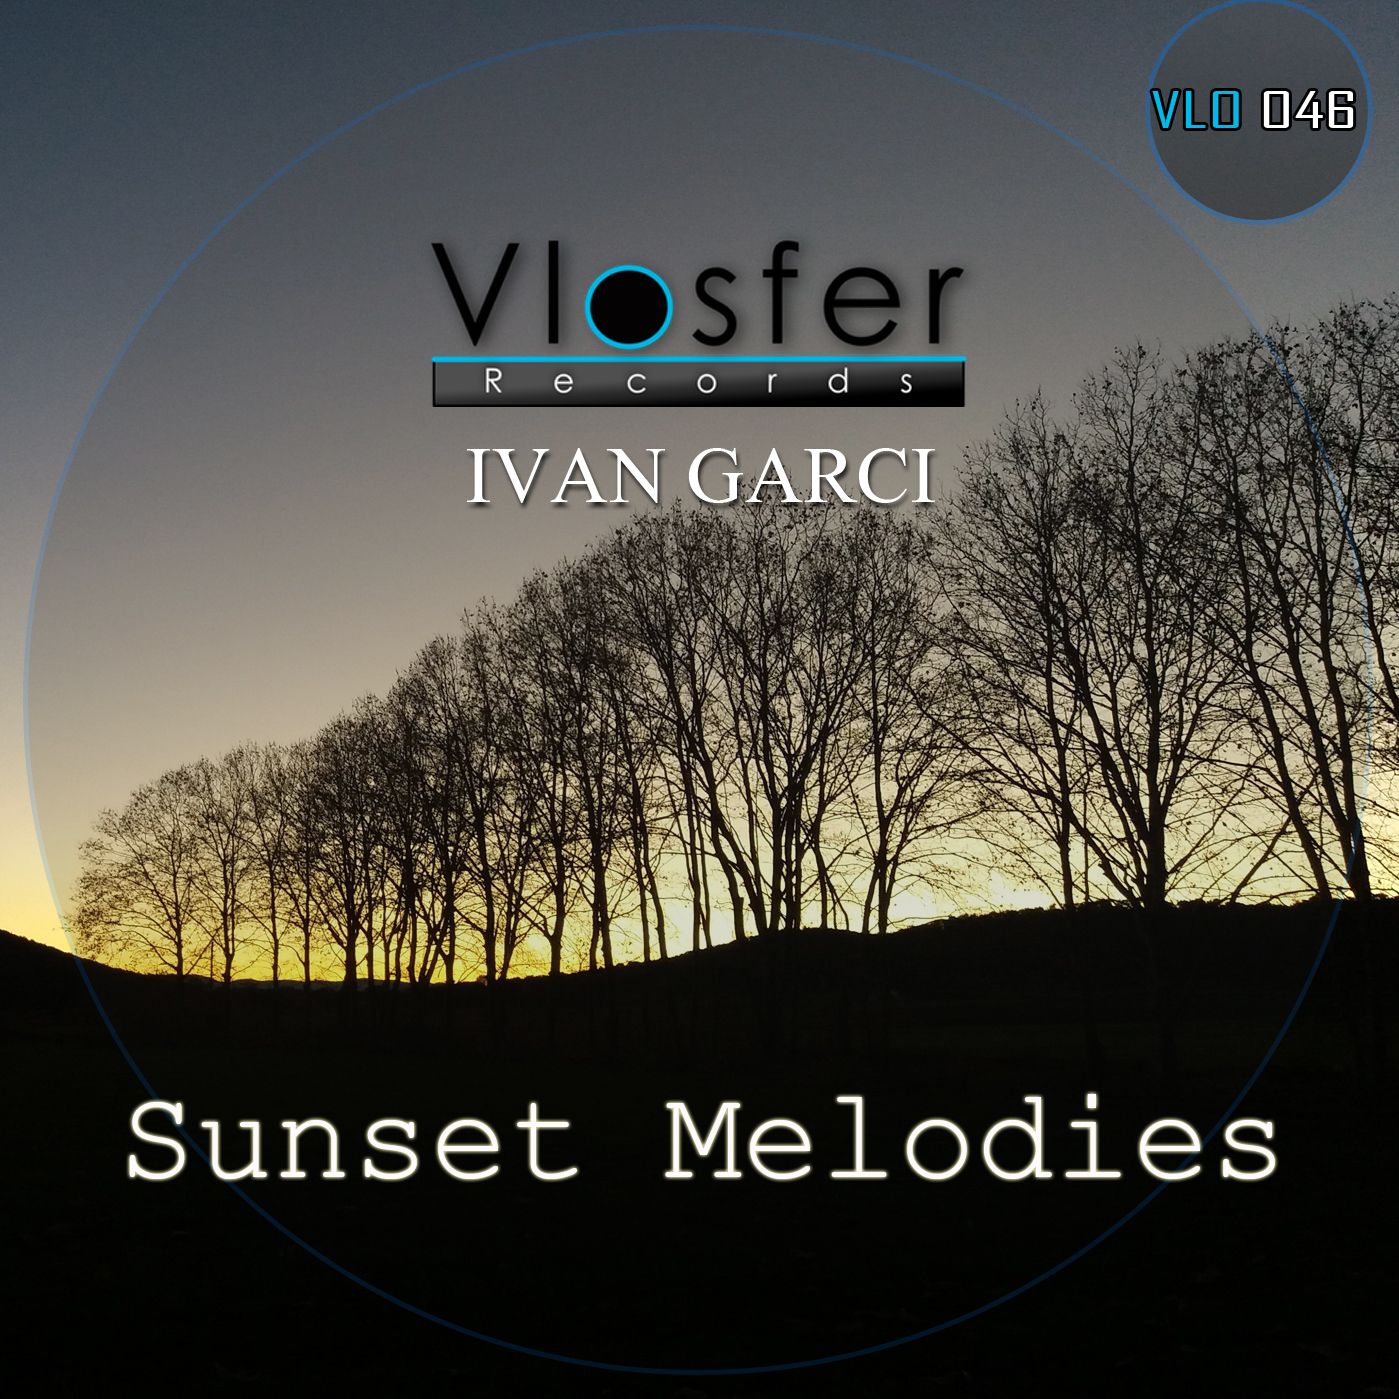 Sii mai Clear - Ivan Garci (low quality sound) Vlosfer records.